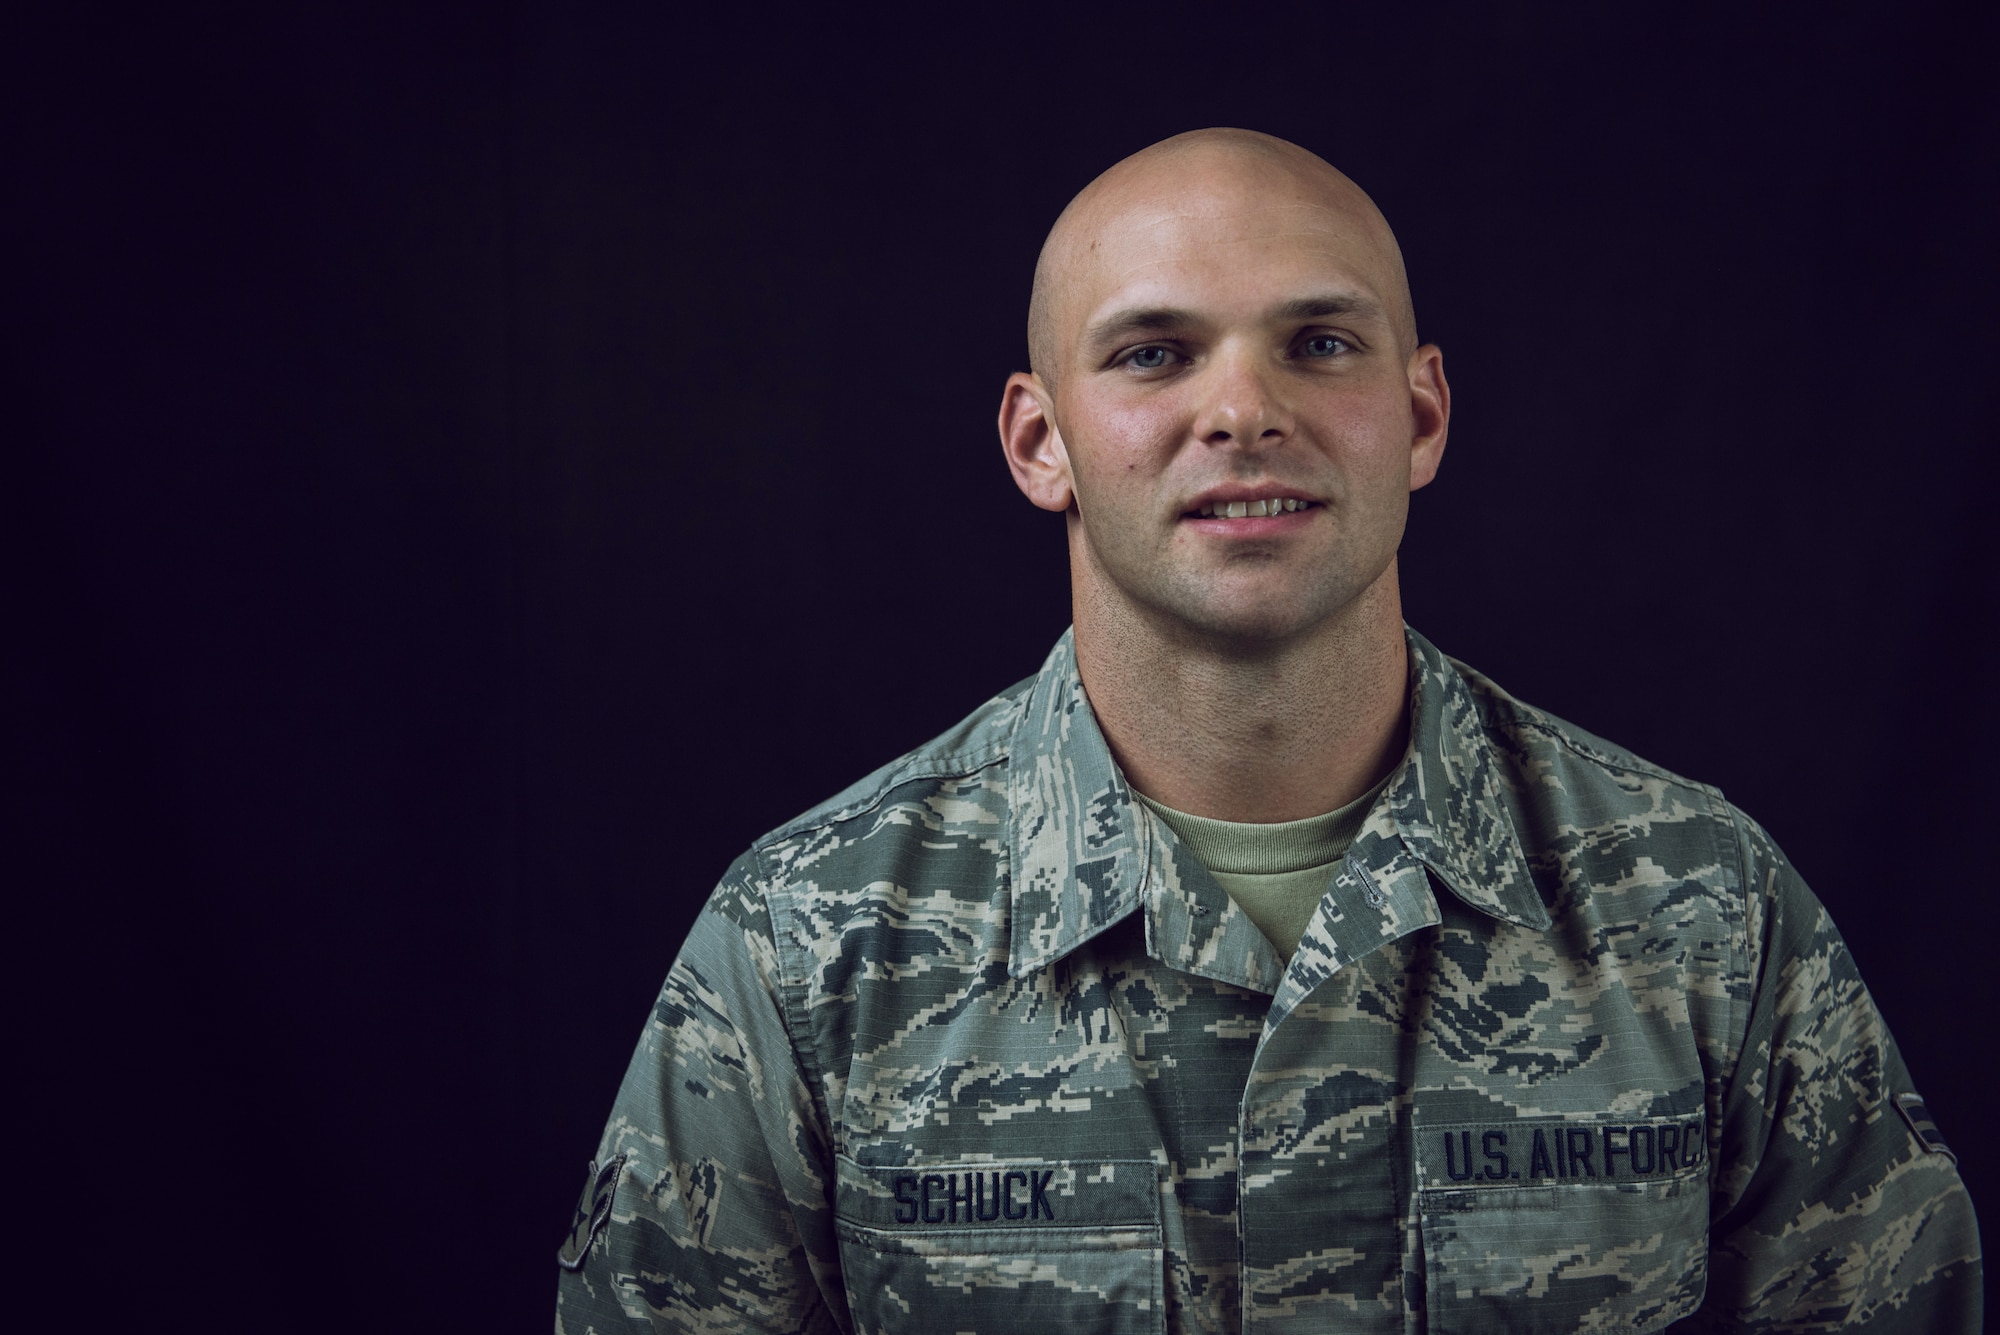 Airman 1st Class Adam Schuck, a services specialist with the 193rd Special Operations Force Support Squadron, Pennsylvania Air National Guard, shares some of his insight